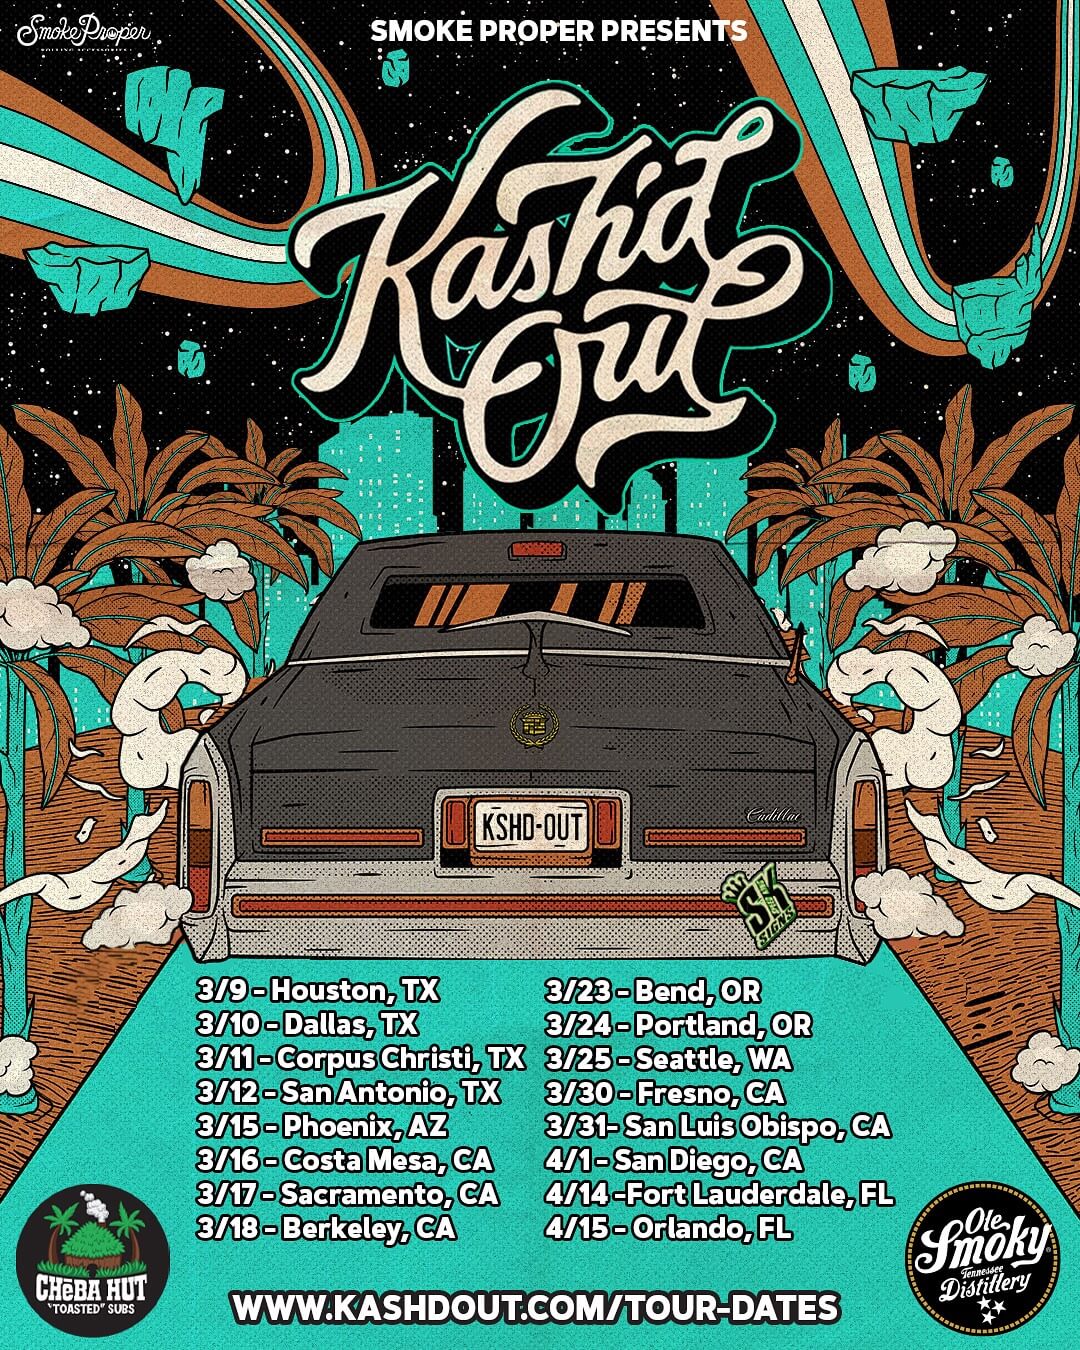 Kash'd Out "Whiskey and Weed" Tour